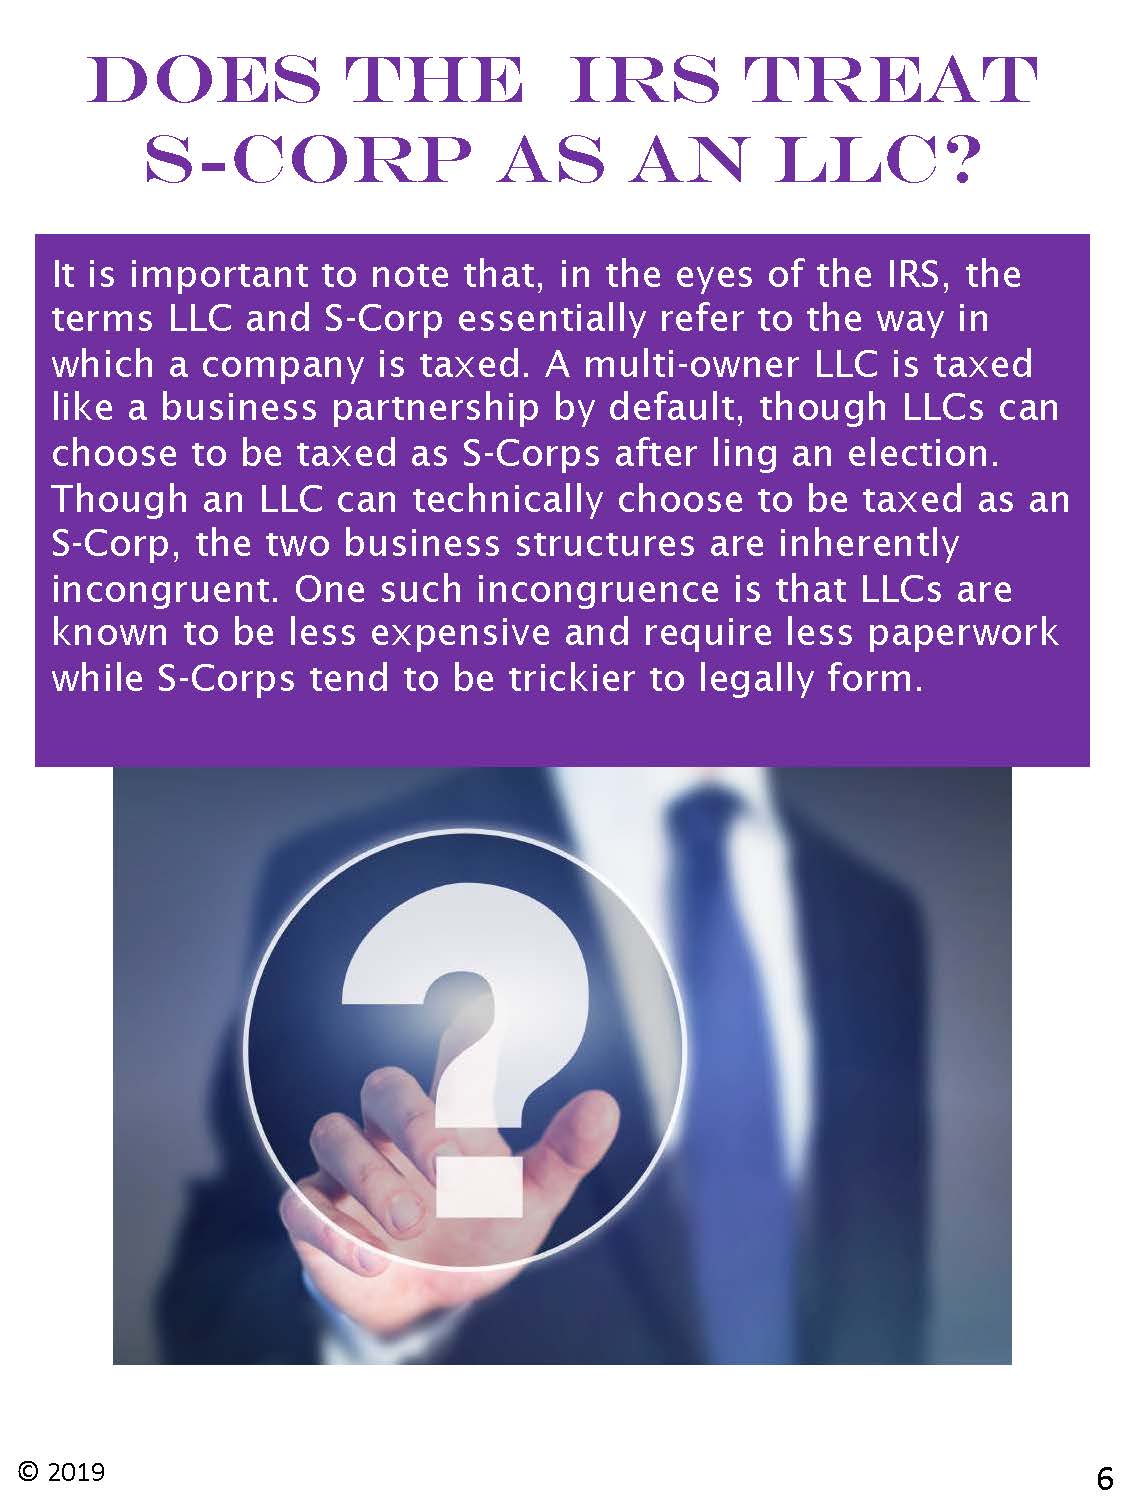 Does the IRS treat S-corporation as an LLC?